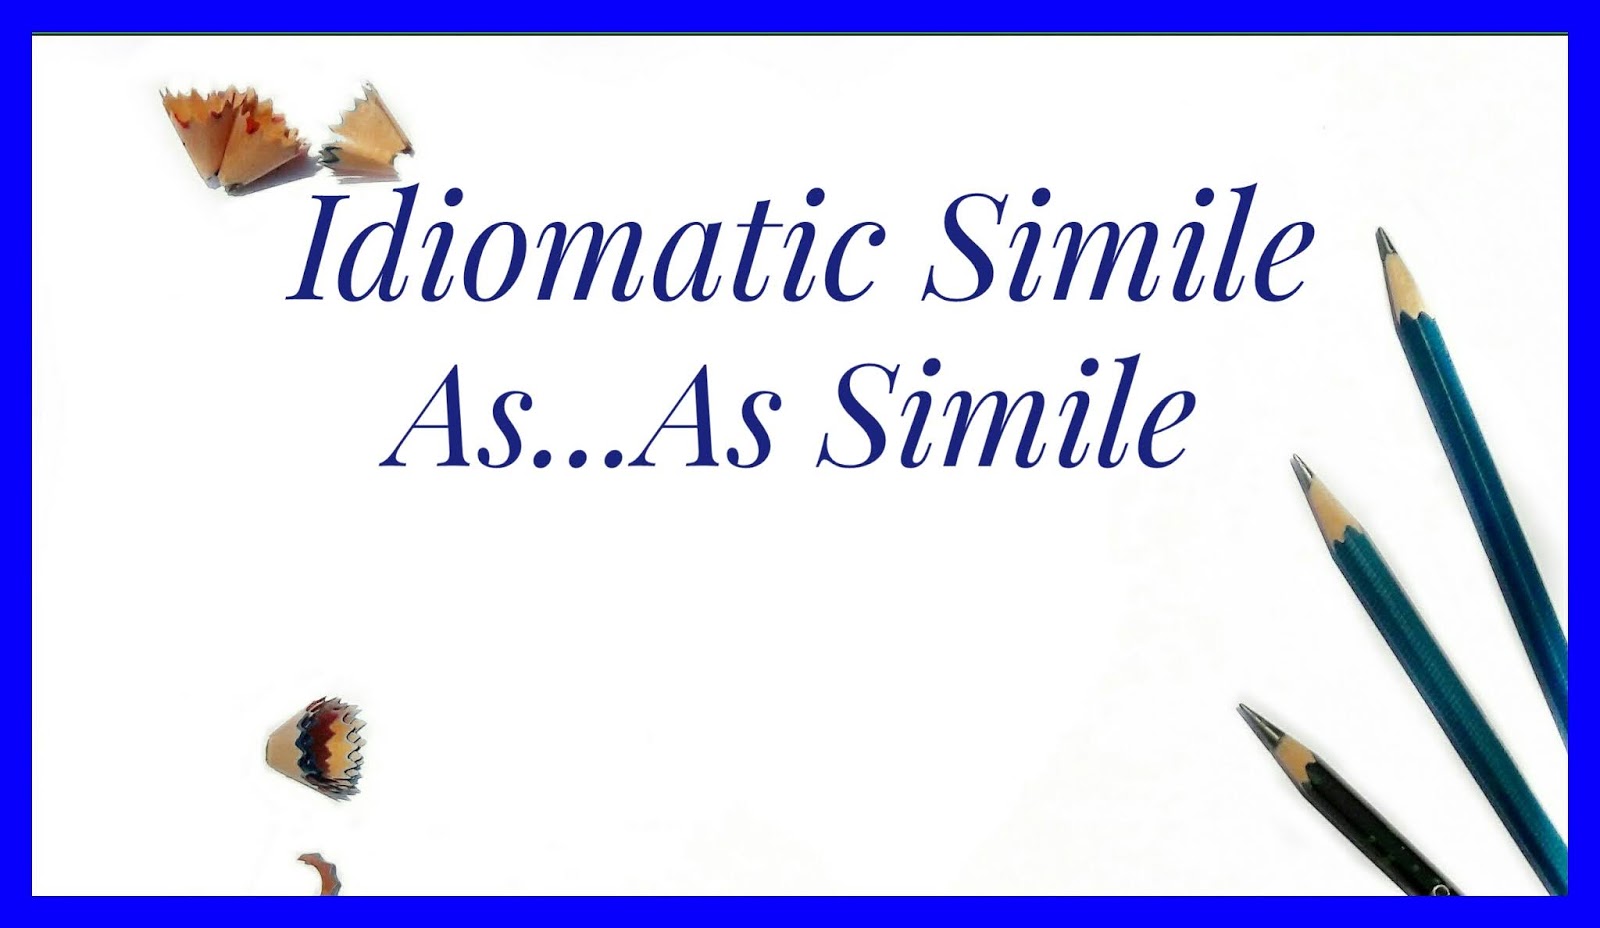 Idiomatic Similes | List of As... As Similes | Comparison words